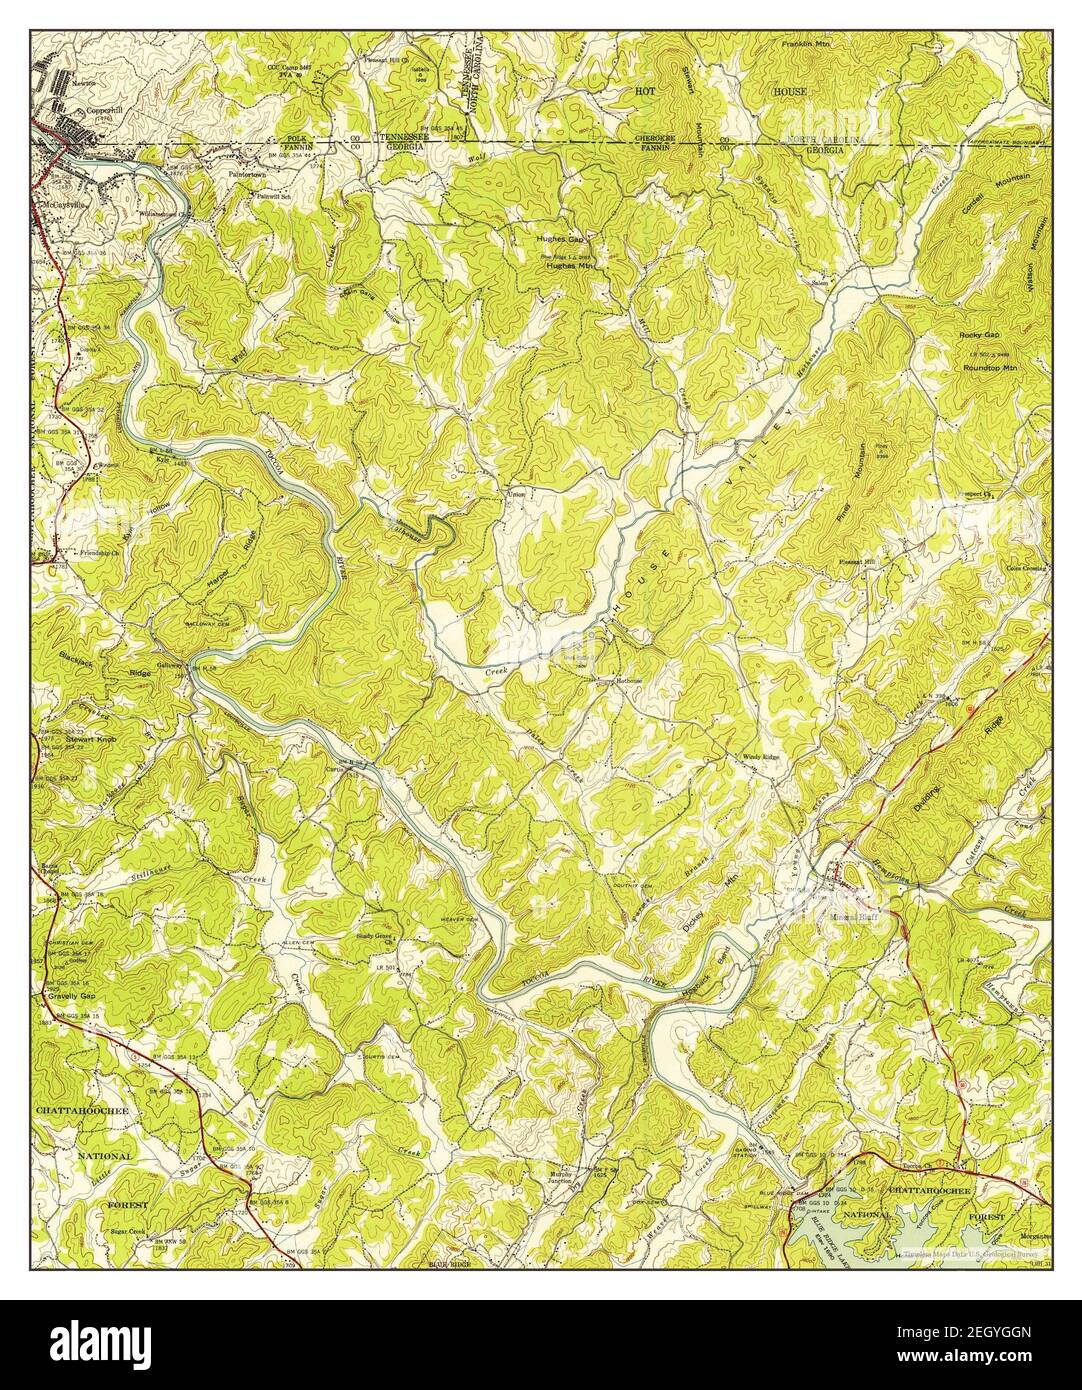 Mineral Bluff, Georgia, map 1941, 1:24000, United States of America by Timeless Maps, data U.S. Geological Survey Foto Stock